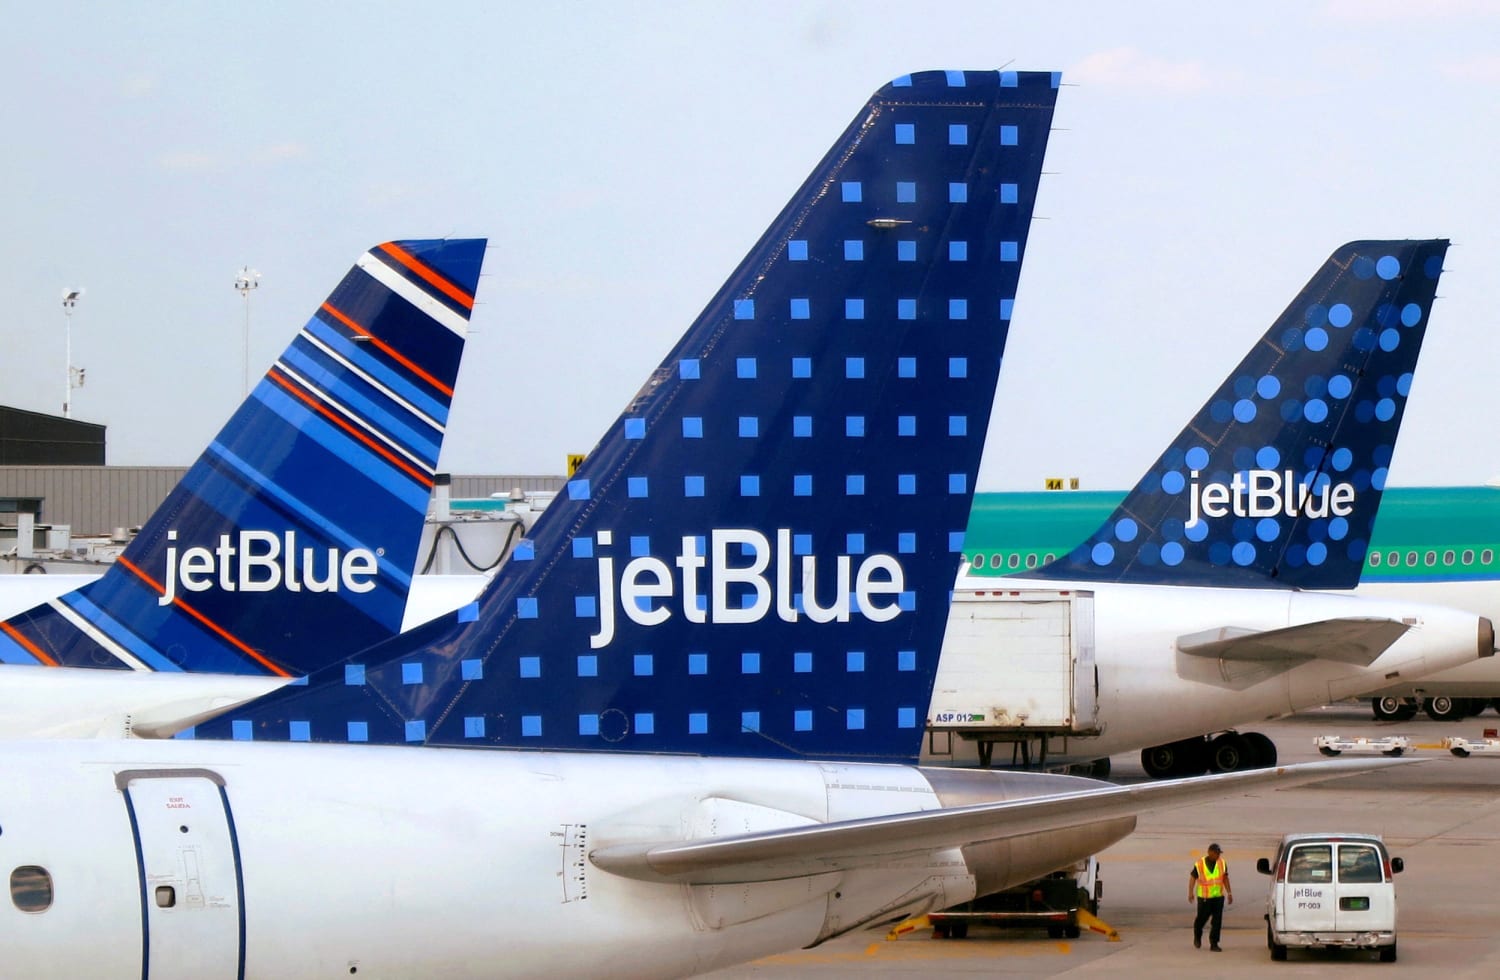 JetBlue cancels 1,280 flights through mid-January due to expected Covid spike